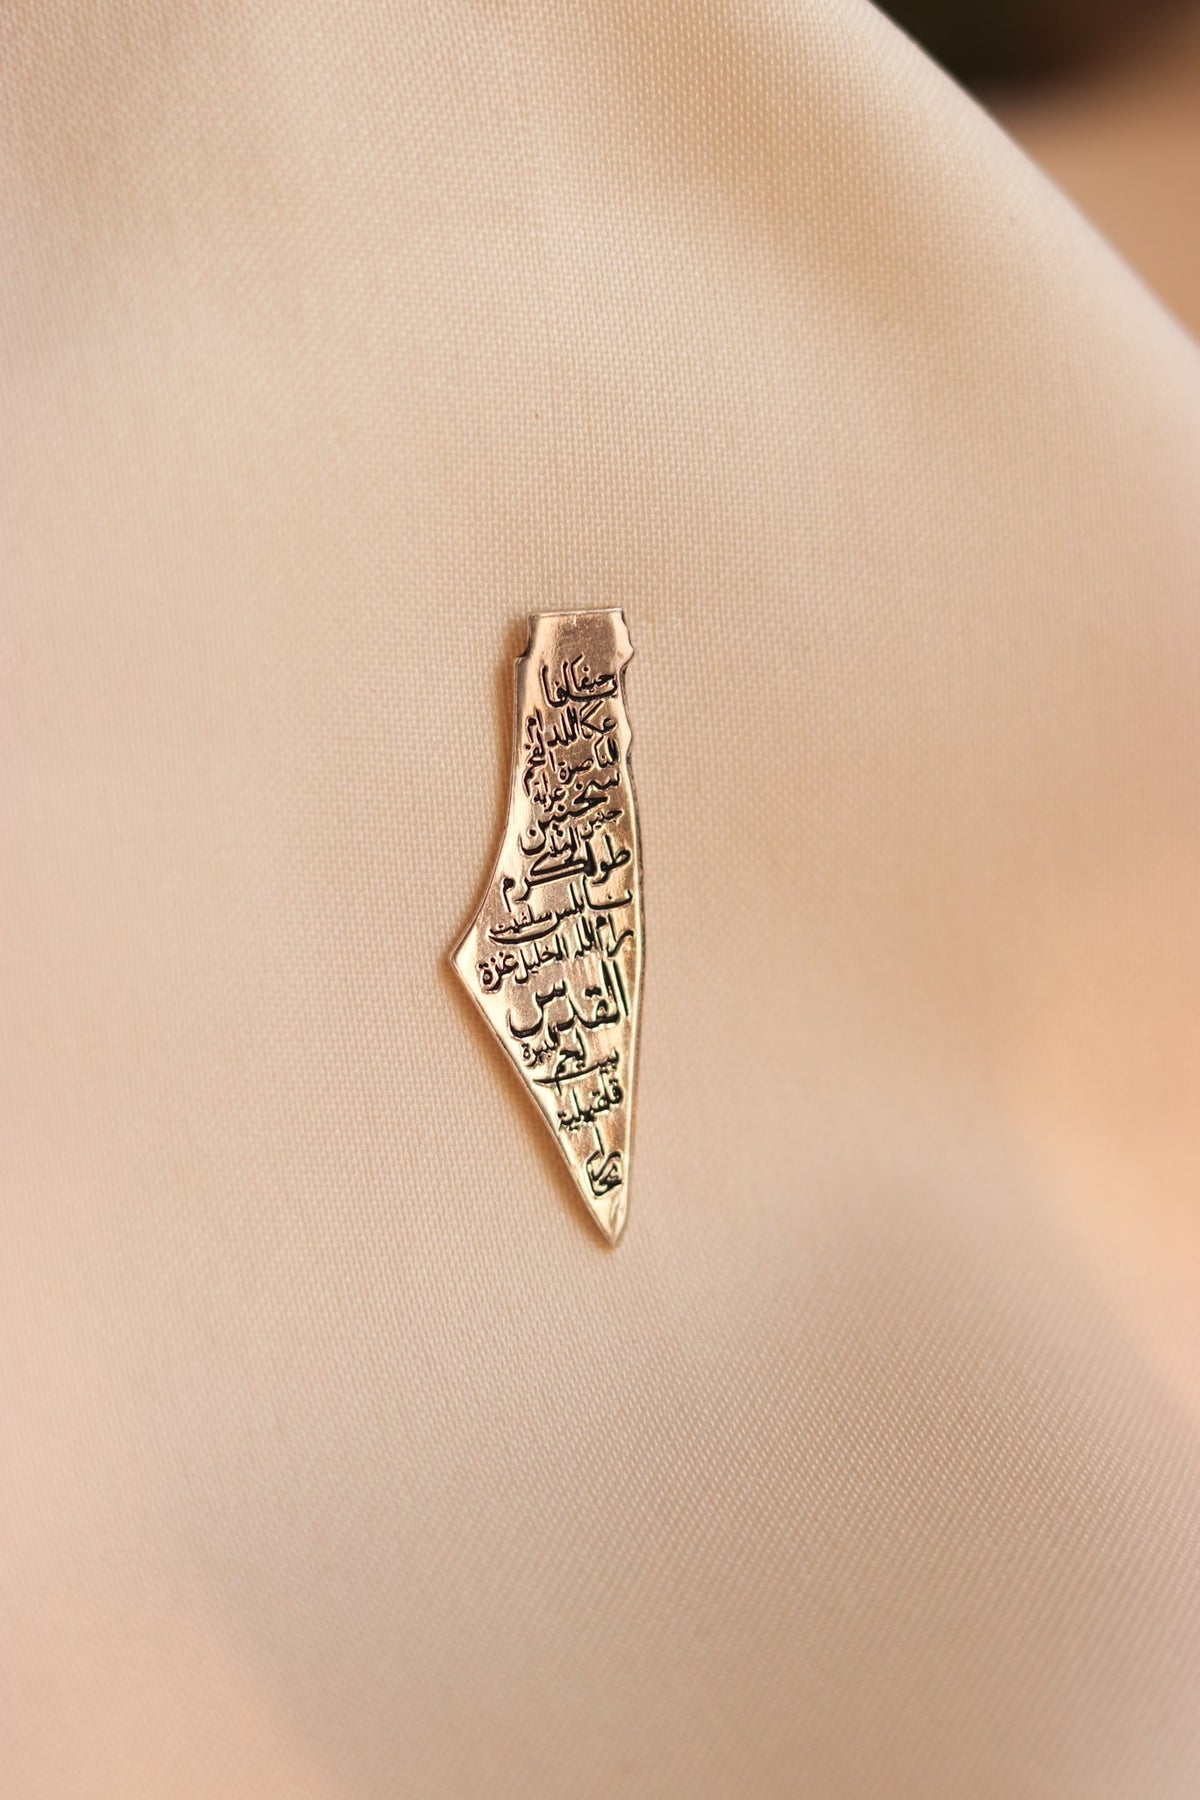 Palestine map with cities engraved inside pin